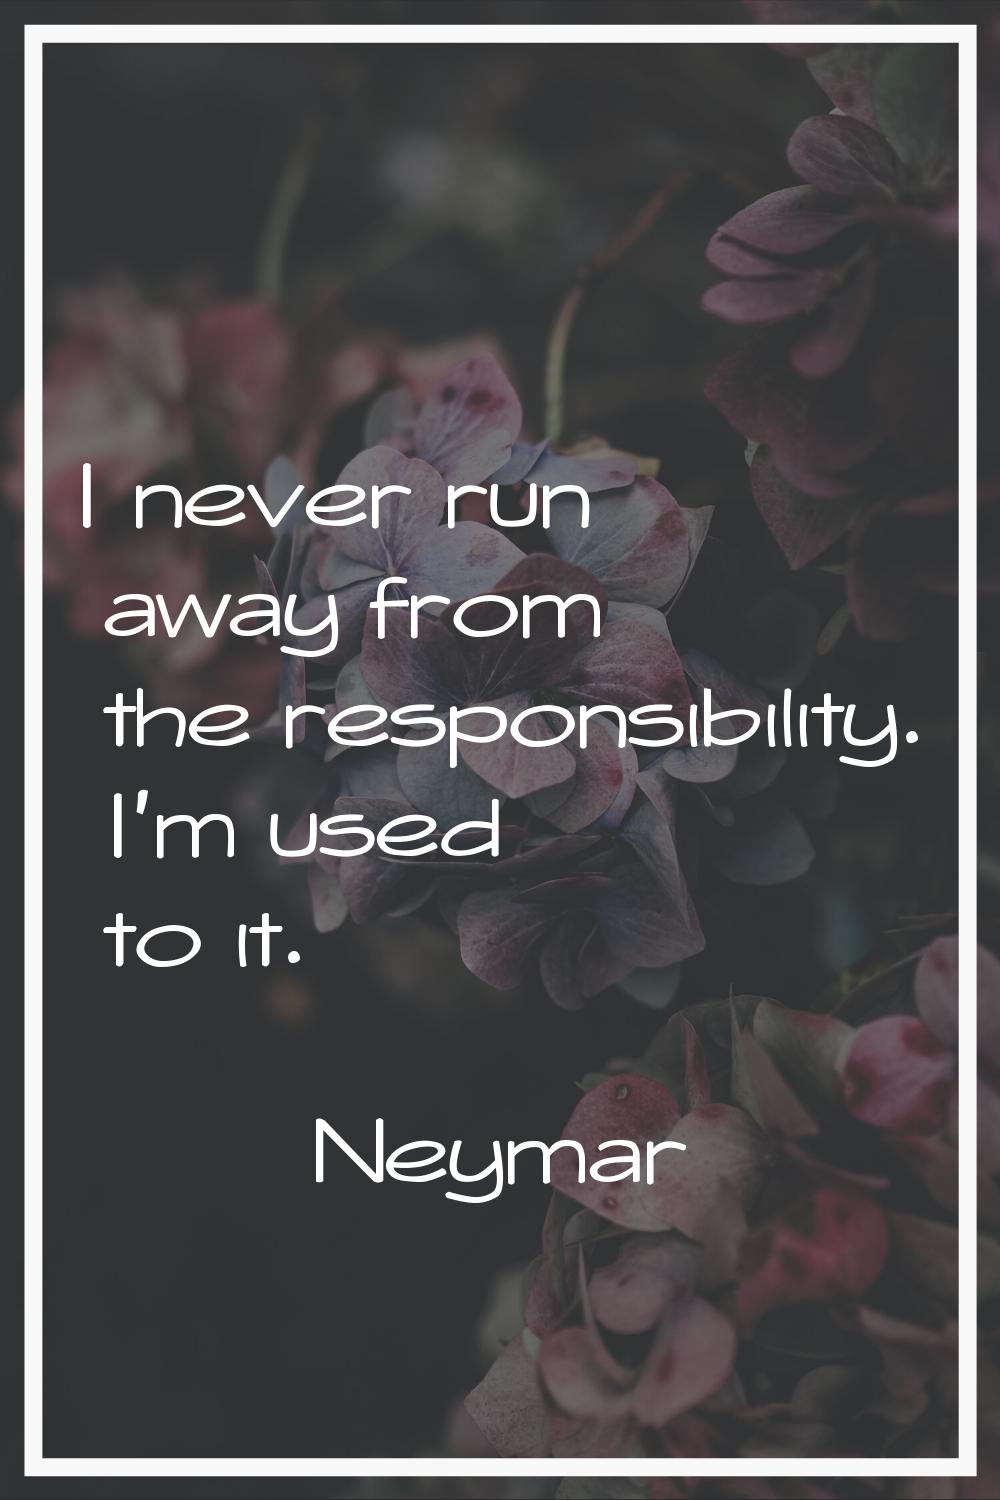 I never run away from the responsibility. I'm used to it.